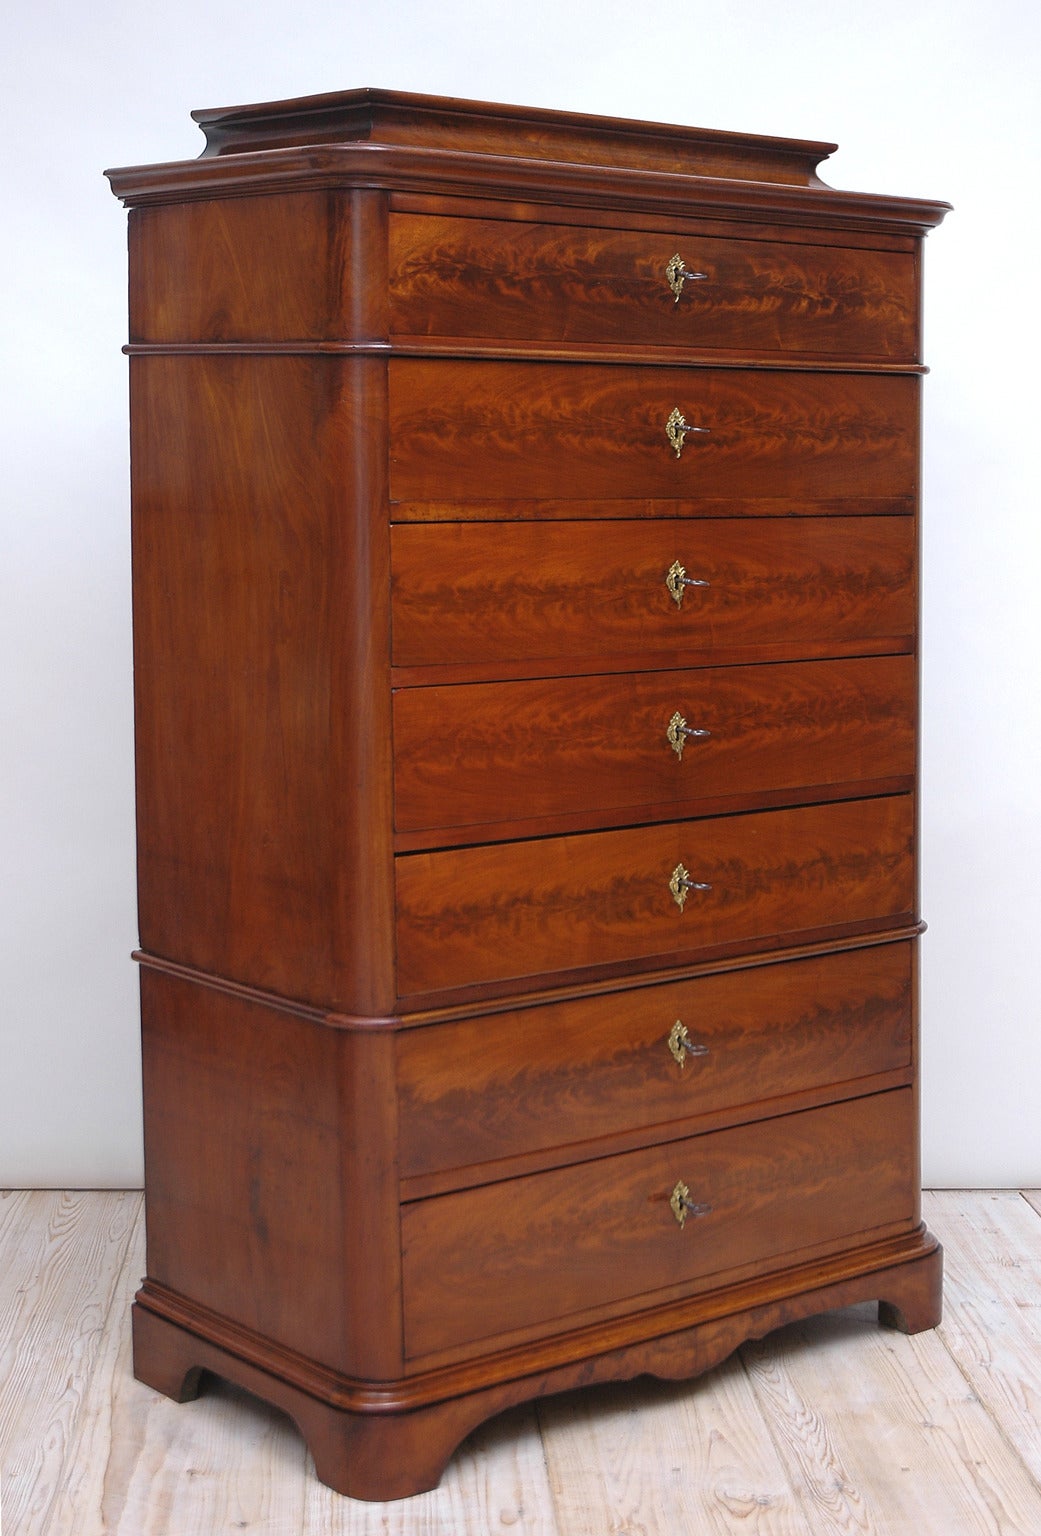 A fine late Biedermeier chiffonier with pedestal top and rounded bracket feet that offers seven drawers with antique fire-gilded key escutcheons (not original), seven keys and seven working locks.

This multipurpose chest works well in a bedroom,